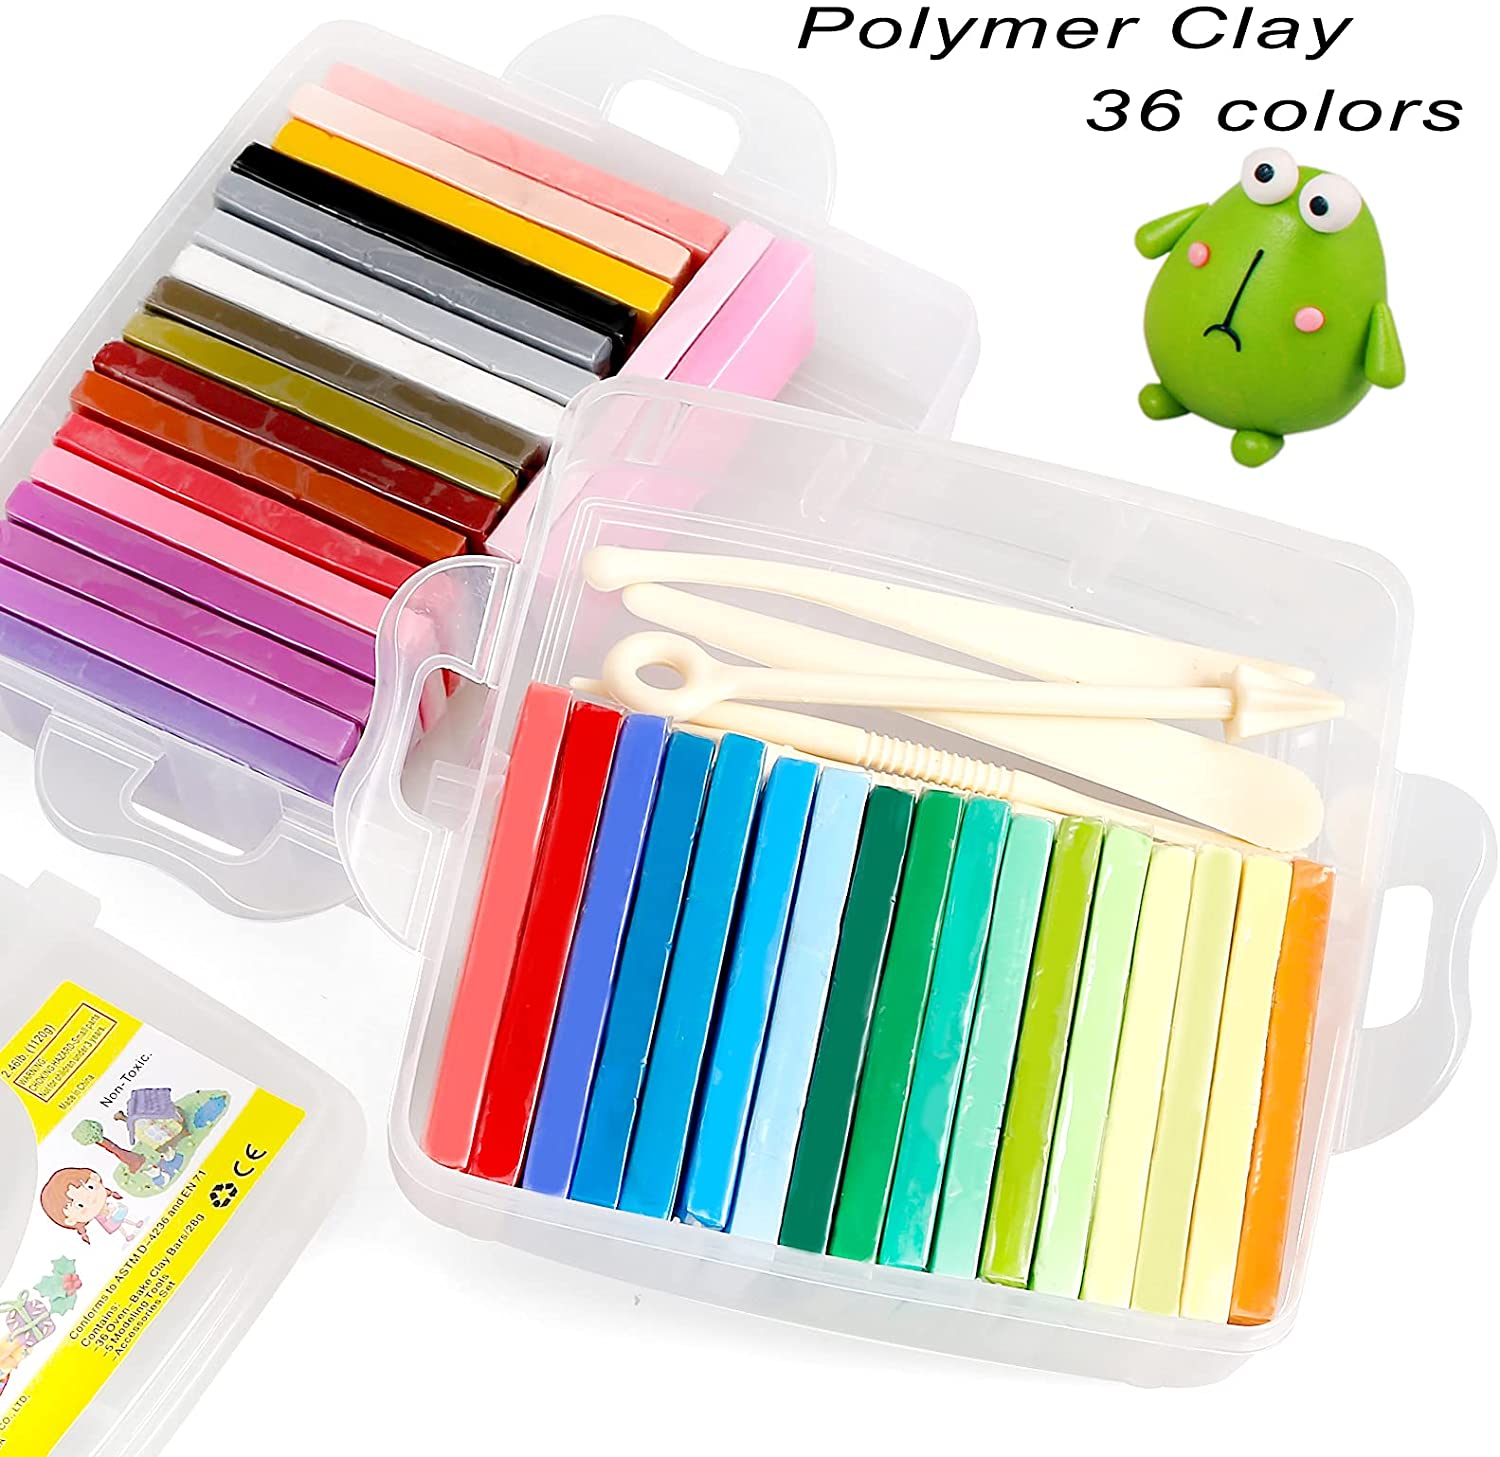 CiaraQ Polymer Clay-Oven Baked Modeling Clay with Sculpting Tools, 36  Colors, 2.6 lbs : : Home